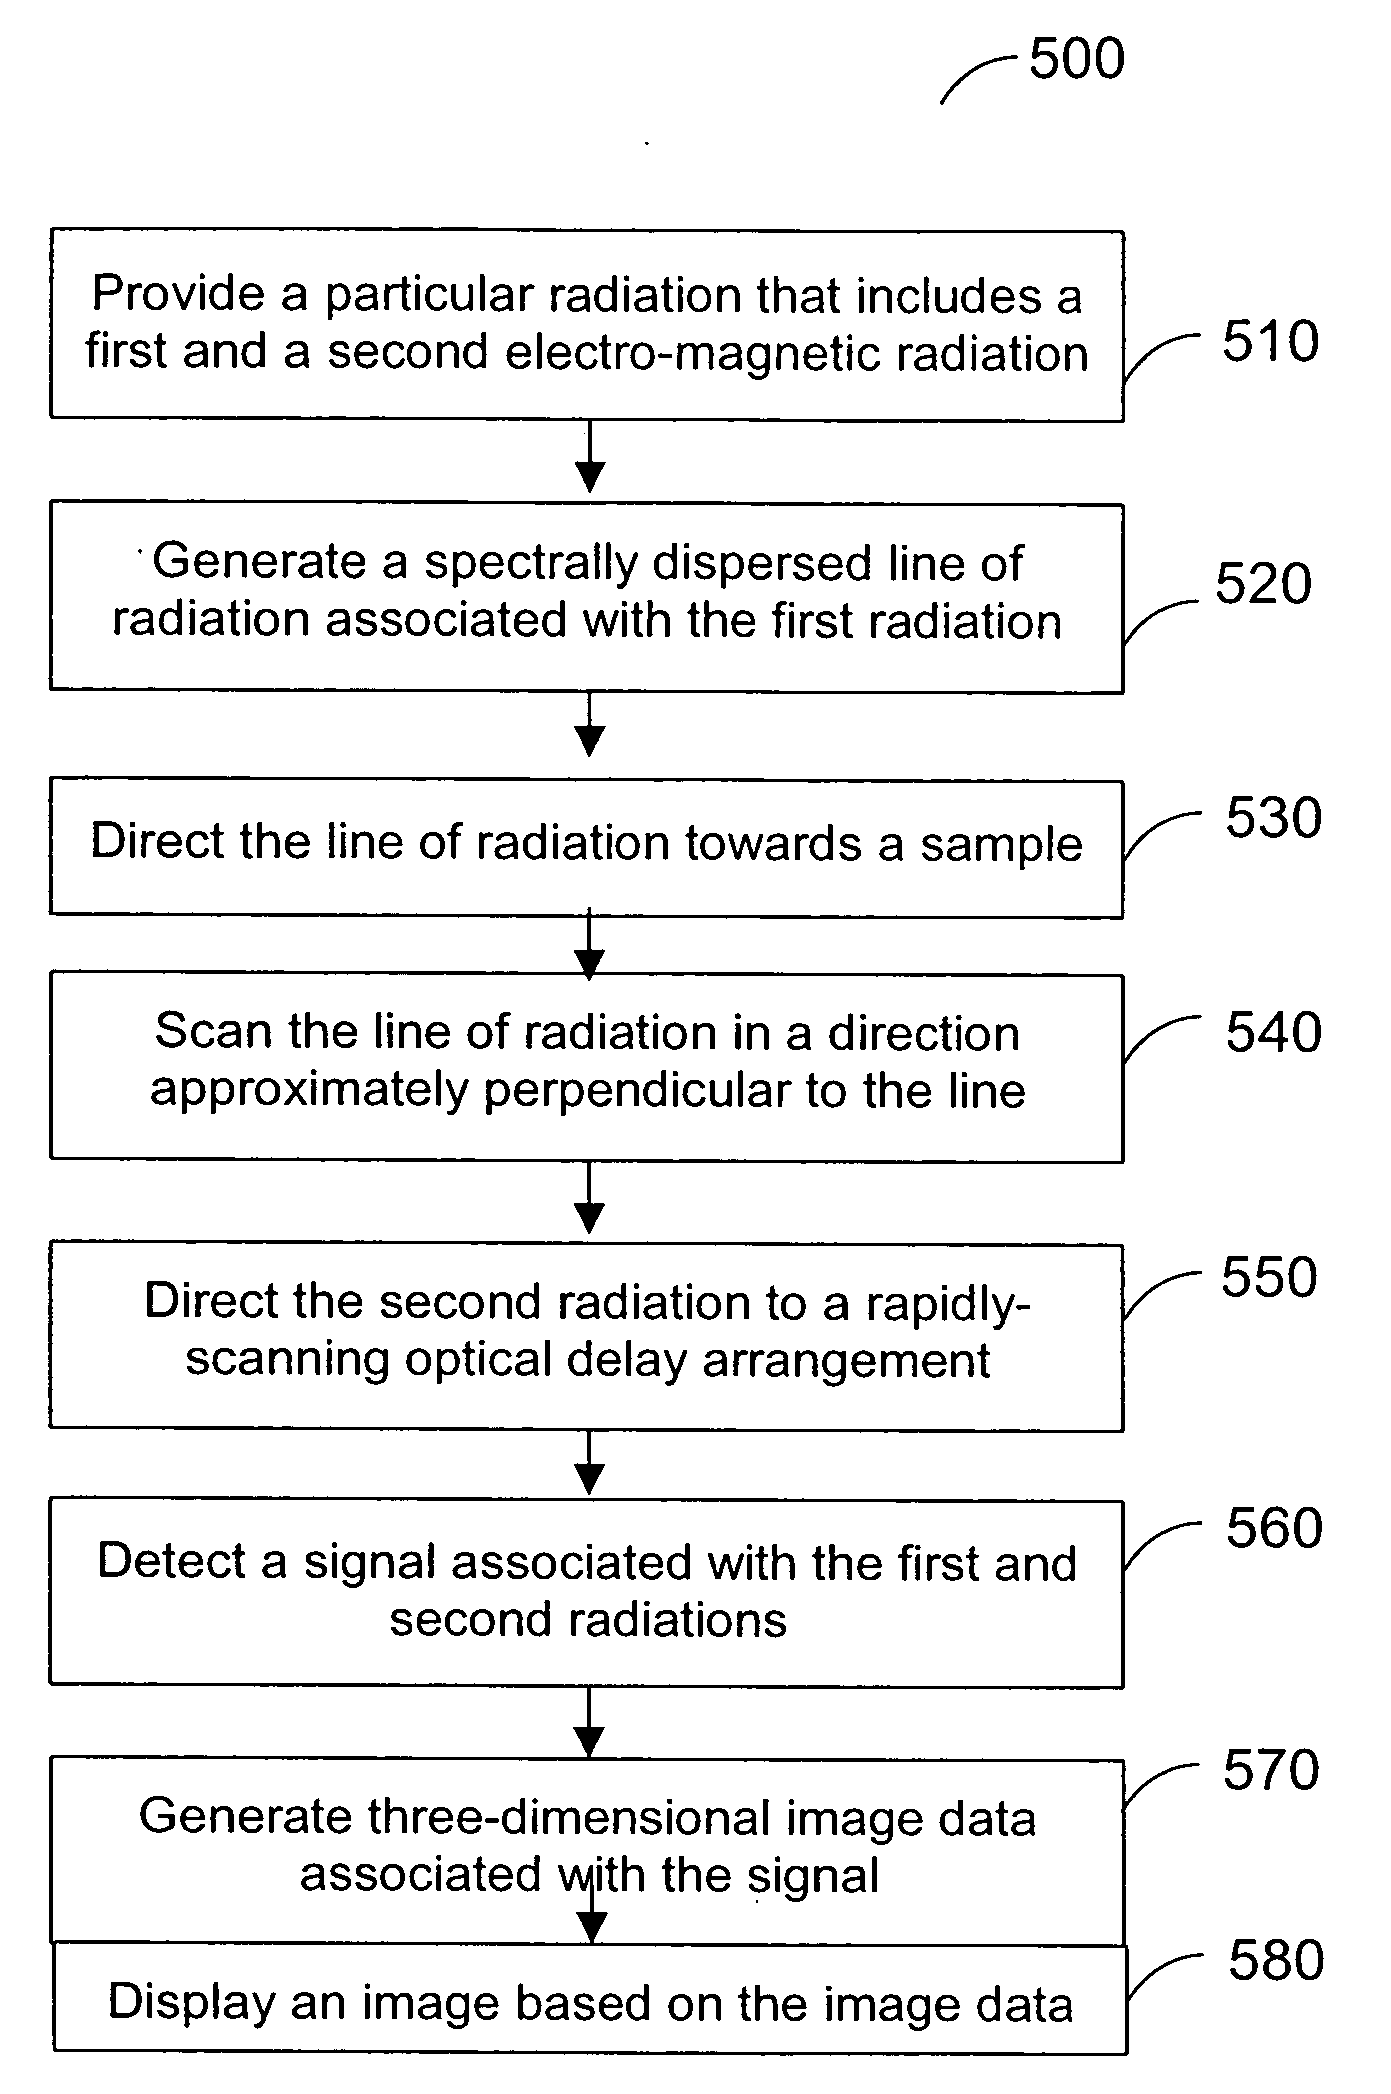 System, method and arrangement which can use spectral encoding heterodyne interferometry techniques for imaging